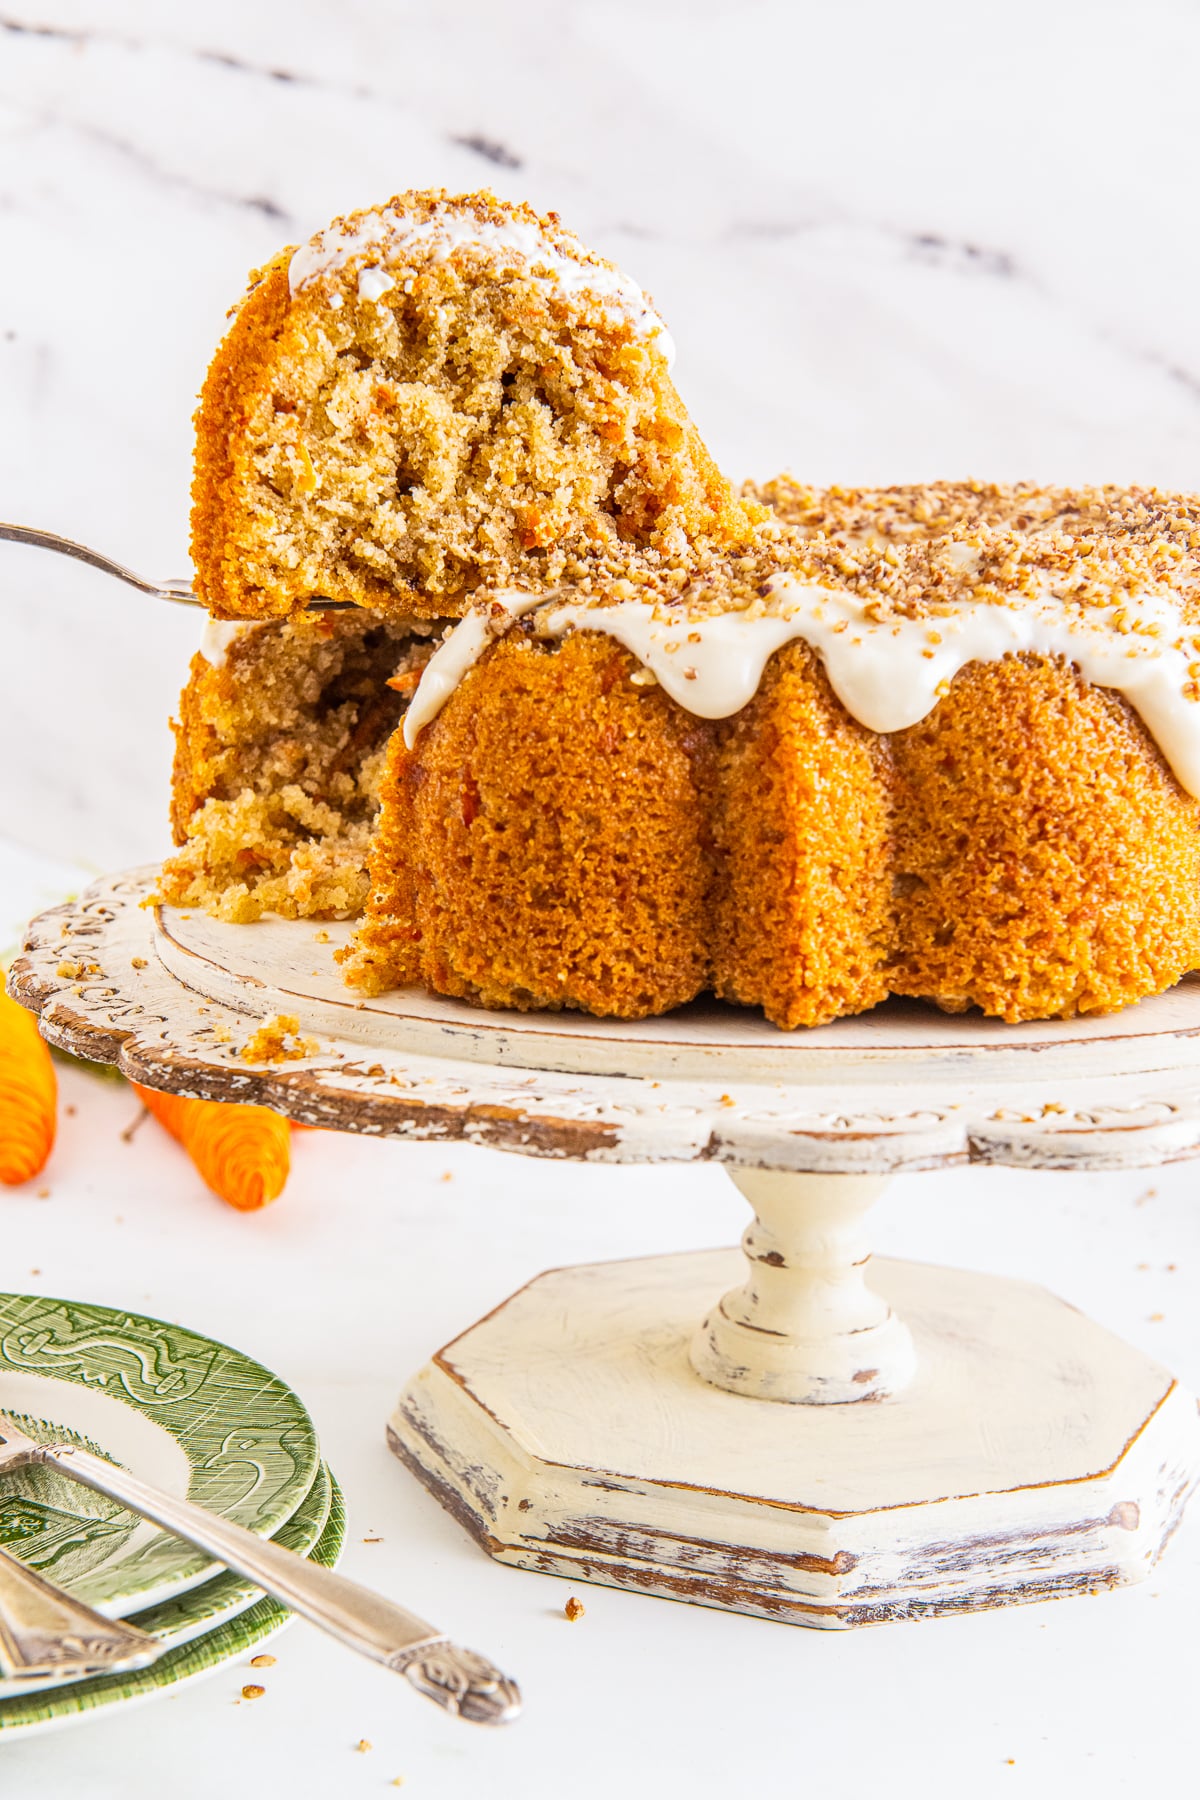 A slice of carrot bundt cake being lifted out by a cake server on a ivory wooden cake stand.